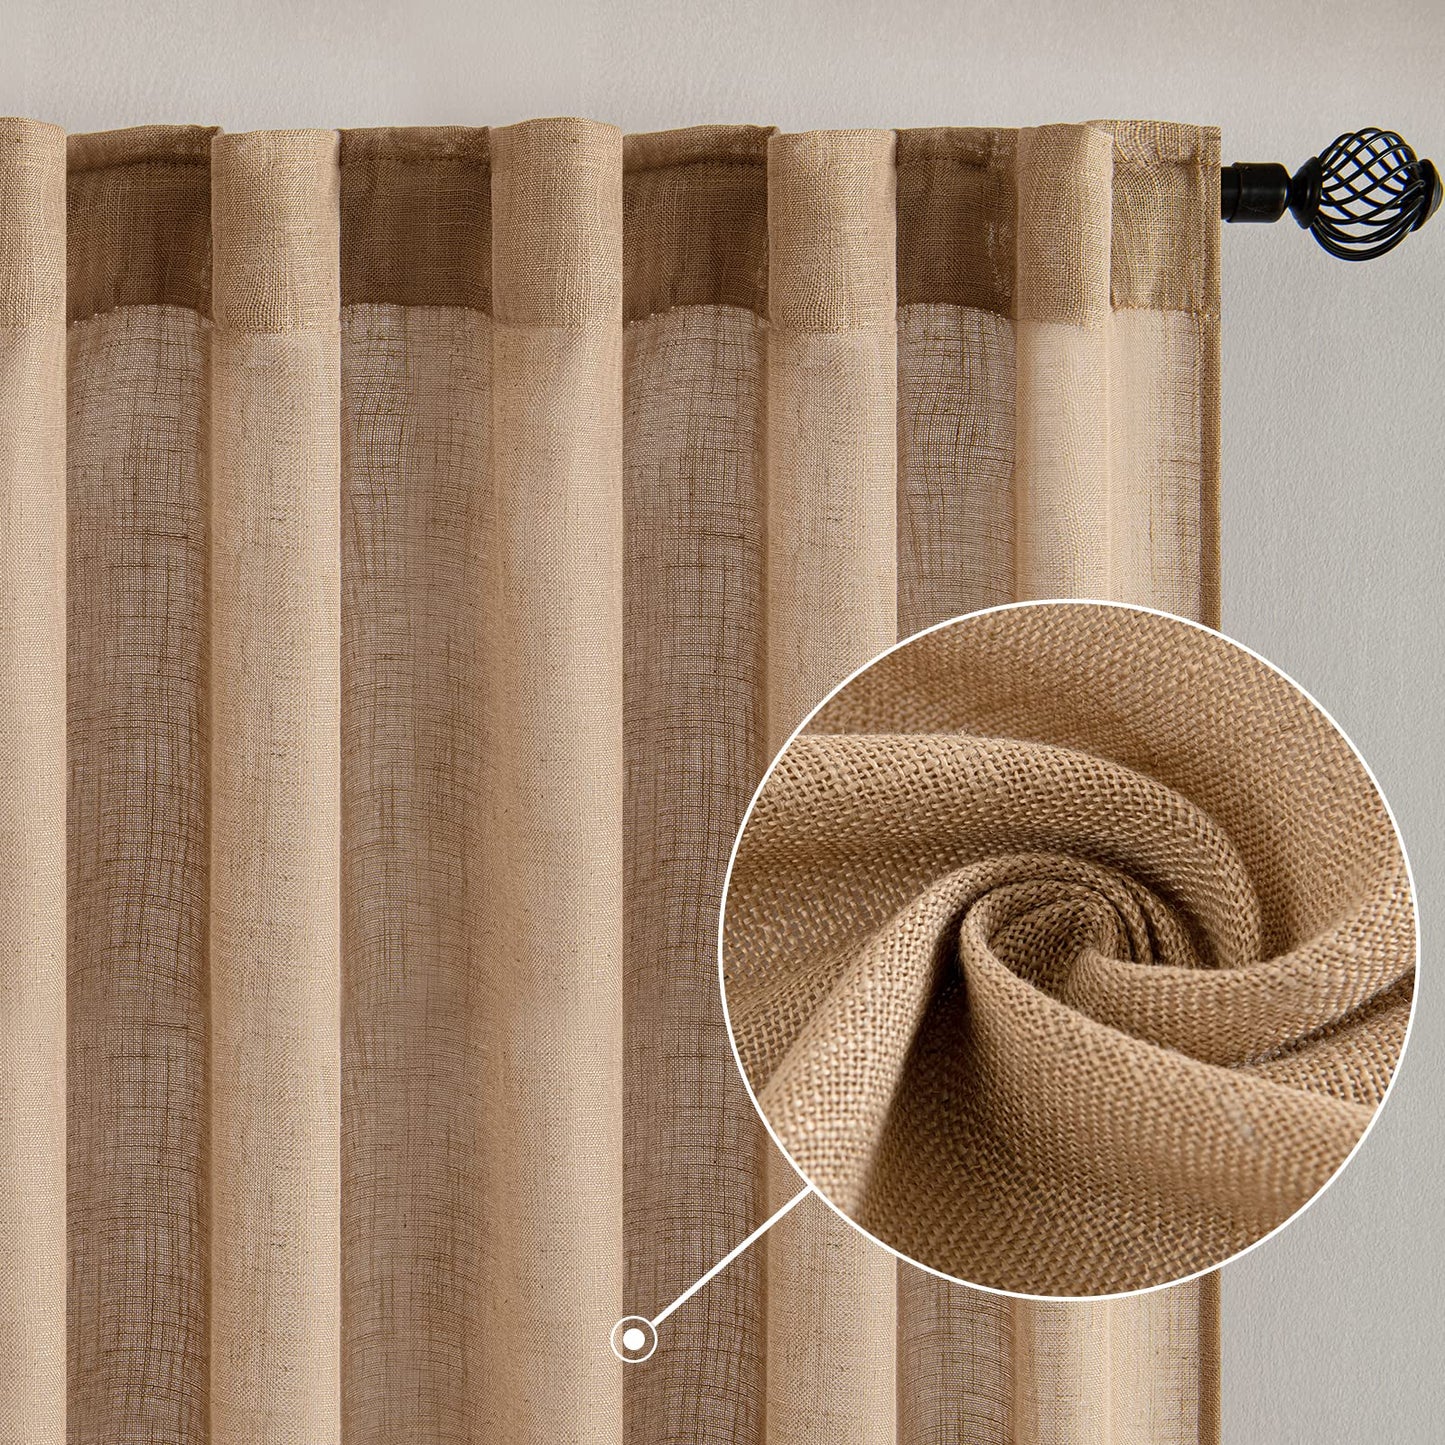 MIULEE Brown Linen Curtains 84 Inch Length for Bedroom Living Room, Soft Thick Linen Textured Window Drapes Semi Sheer Light Filtering Back Tab Rod Pocket Burlap Look Farmhouse Decor, 2 Panels